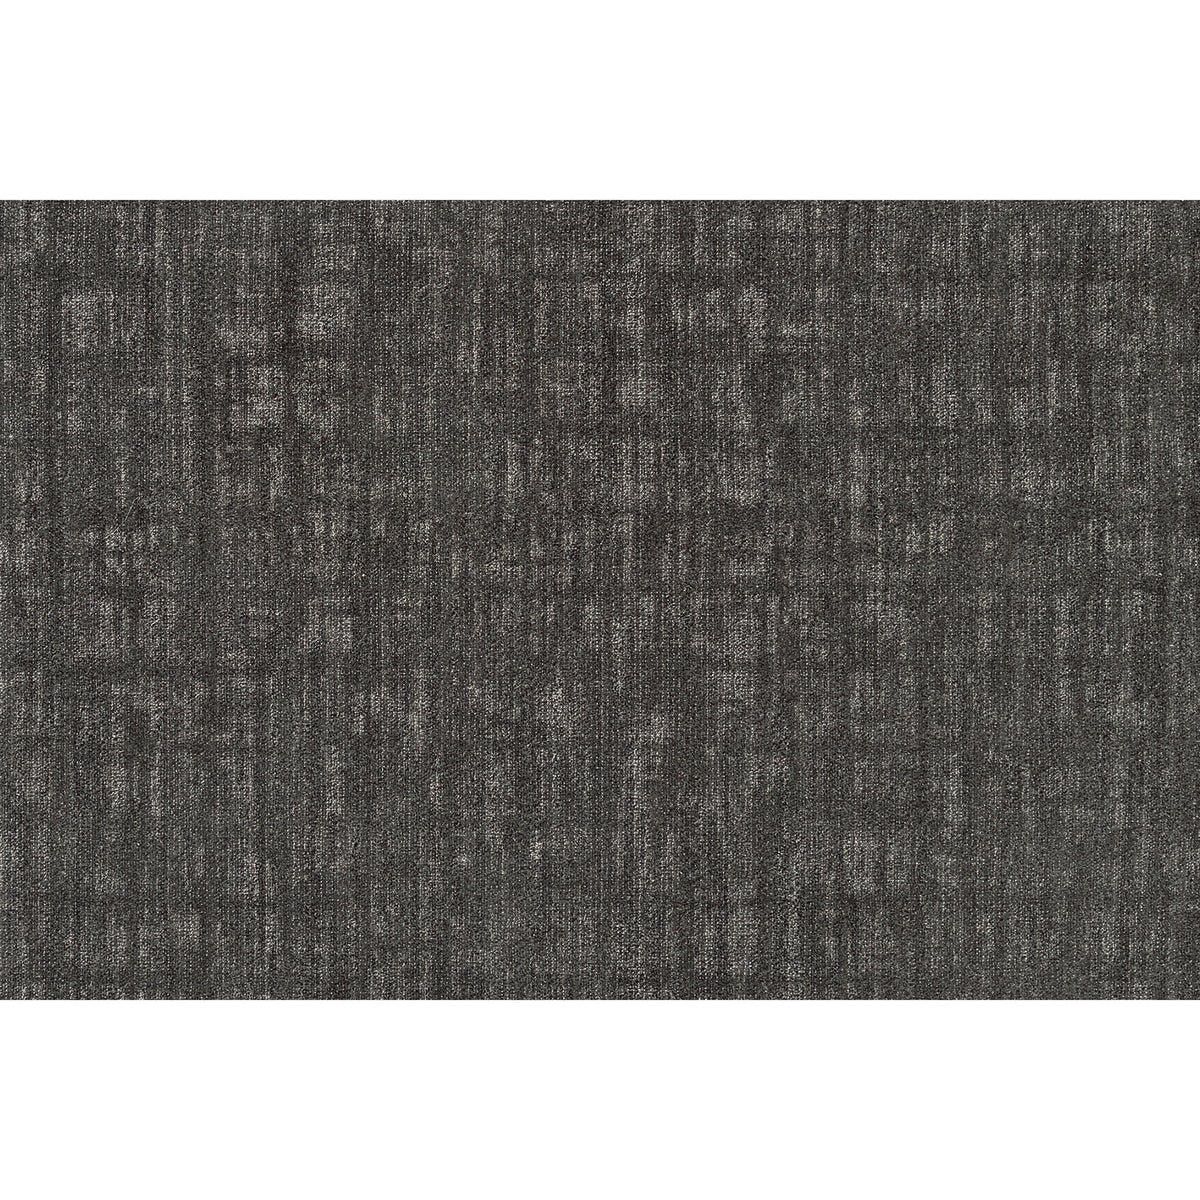 Shaw Contract - Modern Edit - Edition - Carpet Tile - Hearth